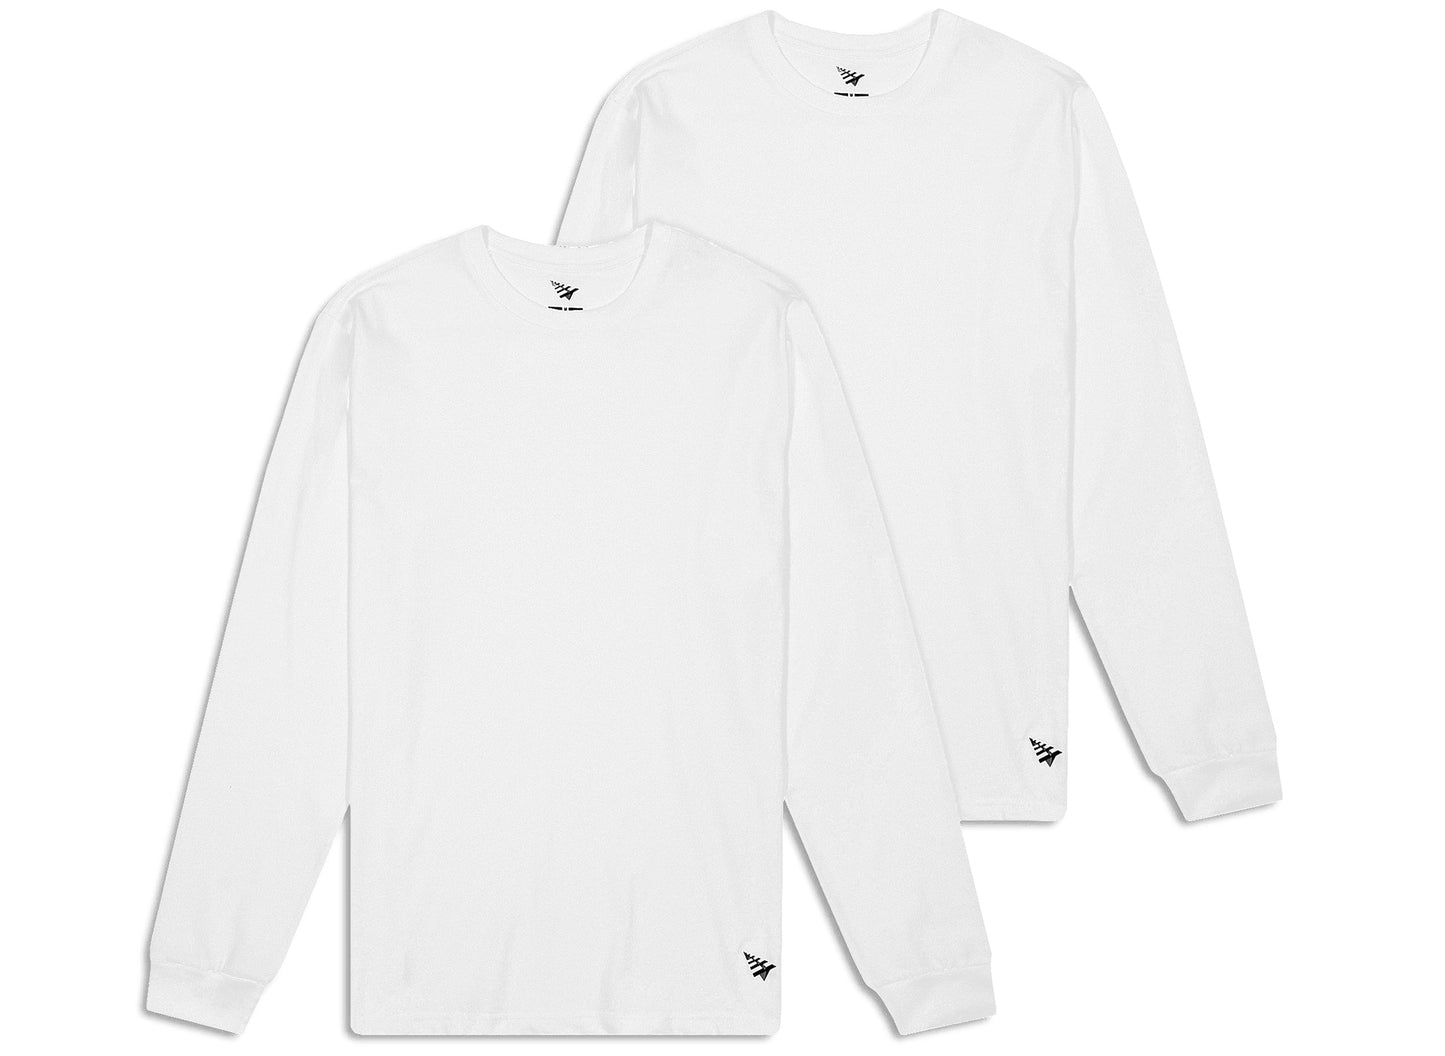 Paper Planes Essentials 2 Pack Long Sleeve Tees in White